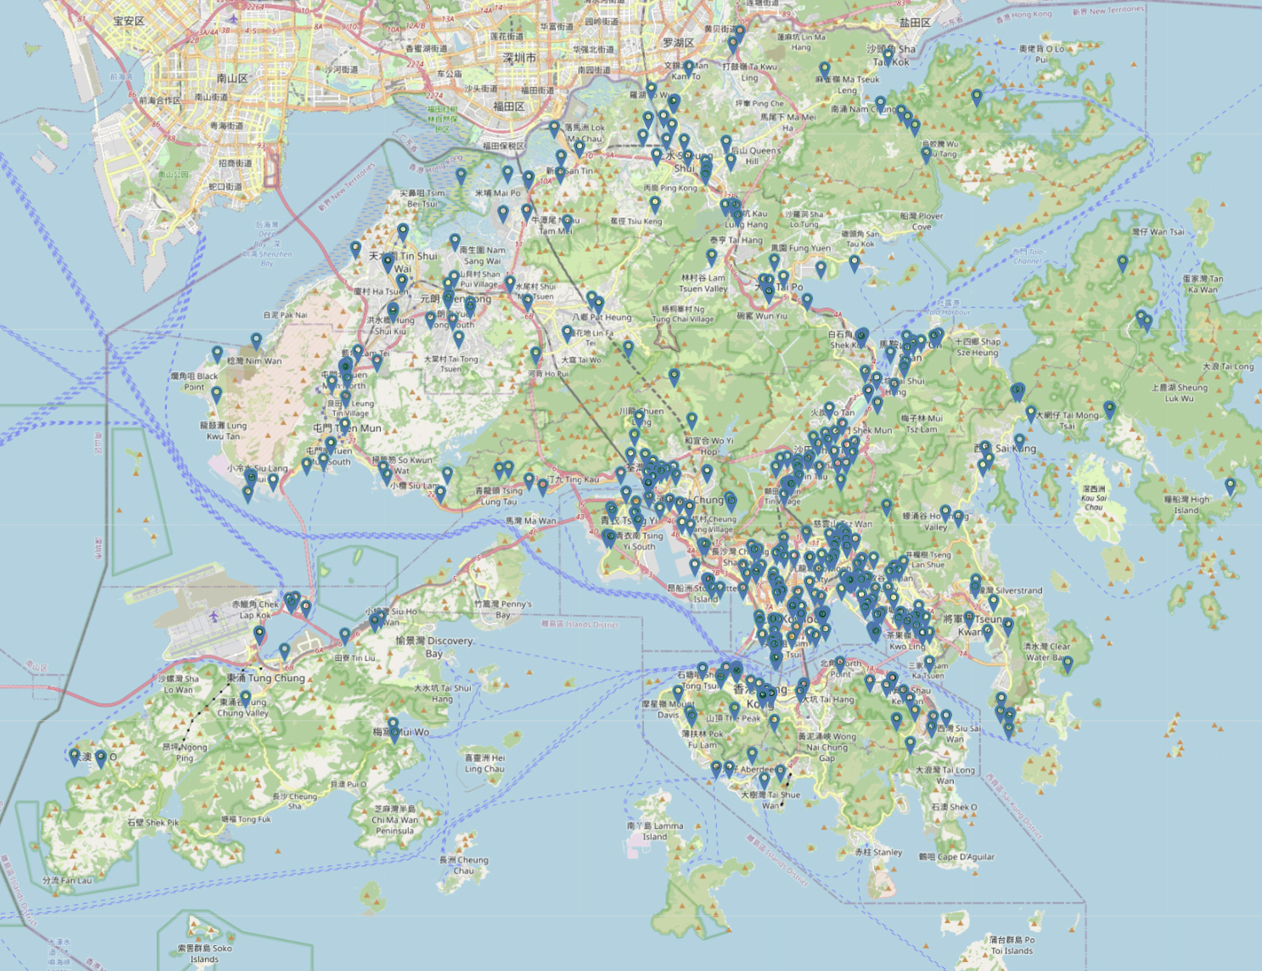 Over 500 GWIN gateways are widely distributed across various districts in Hong Kong.